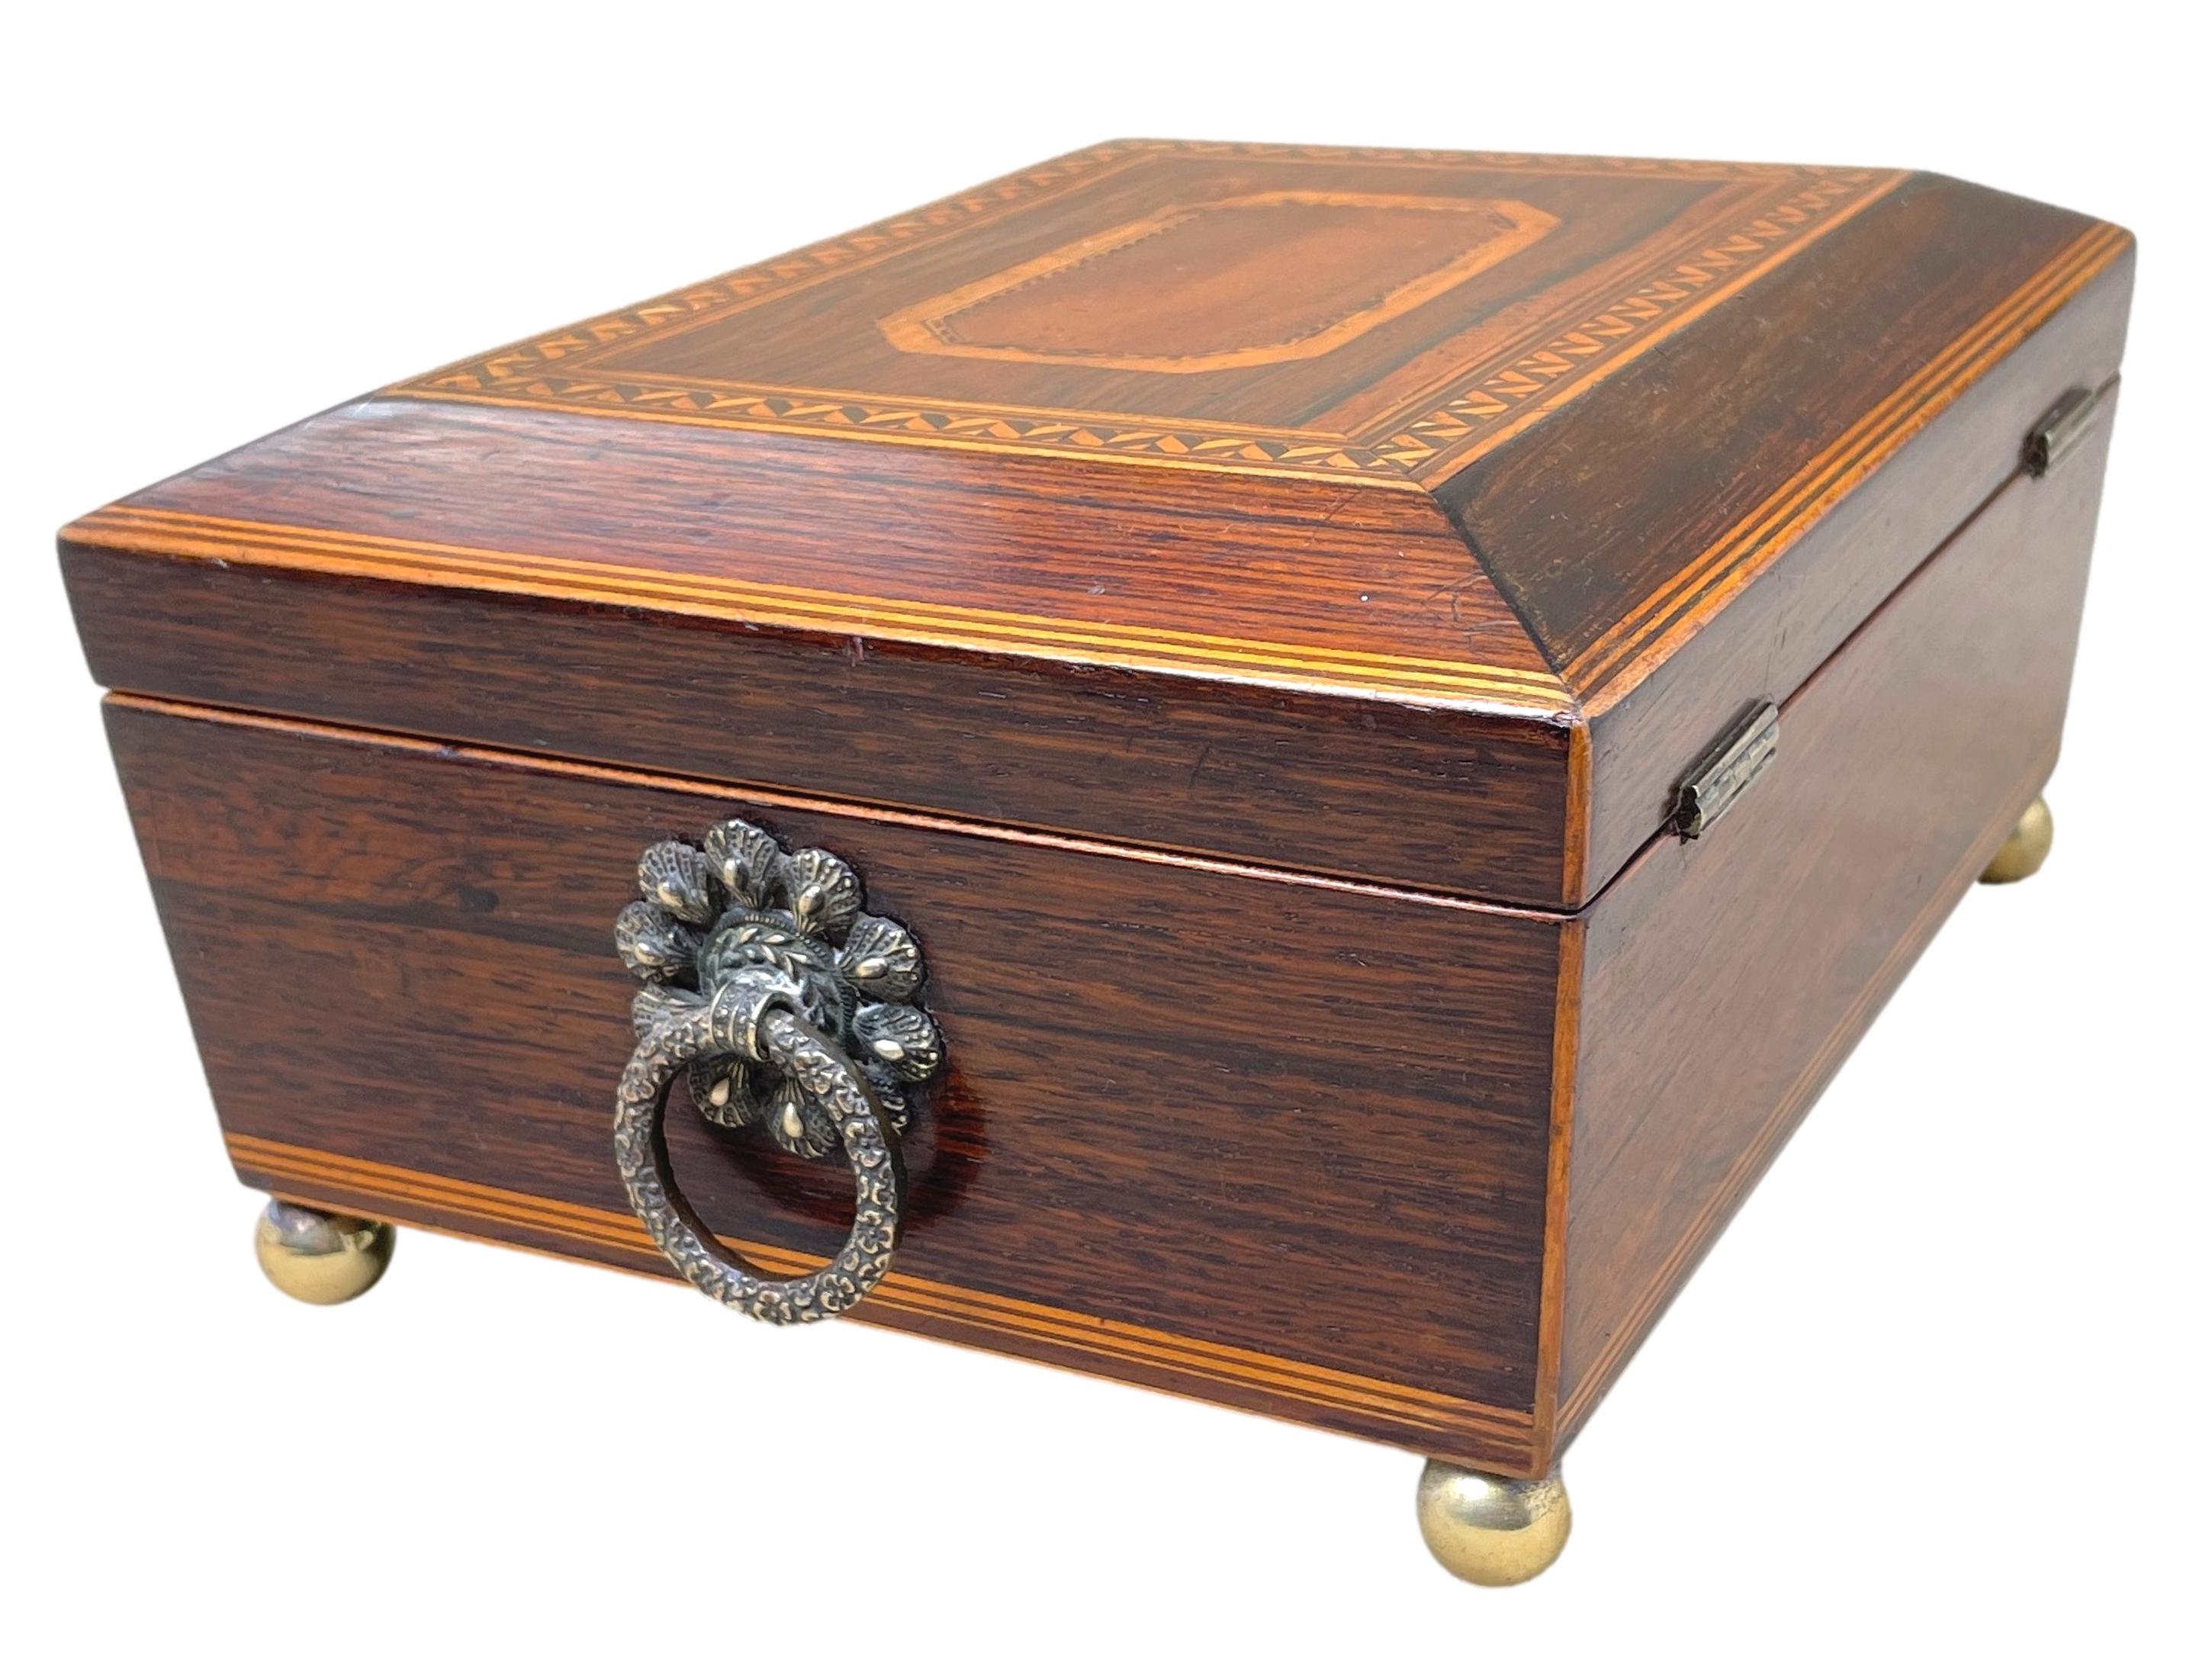 A charming mid 19th century rosewood jewellery box having attractive inlaid decoration to hinged lid enclosing lined interior with elegant original brass ring handles raised on original brass ball feet.

A sweet little jewellery box of sensible,